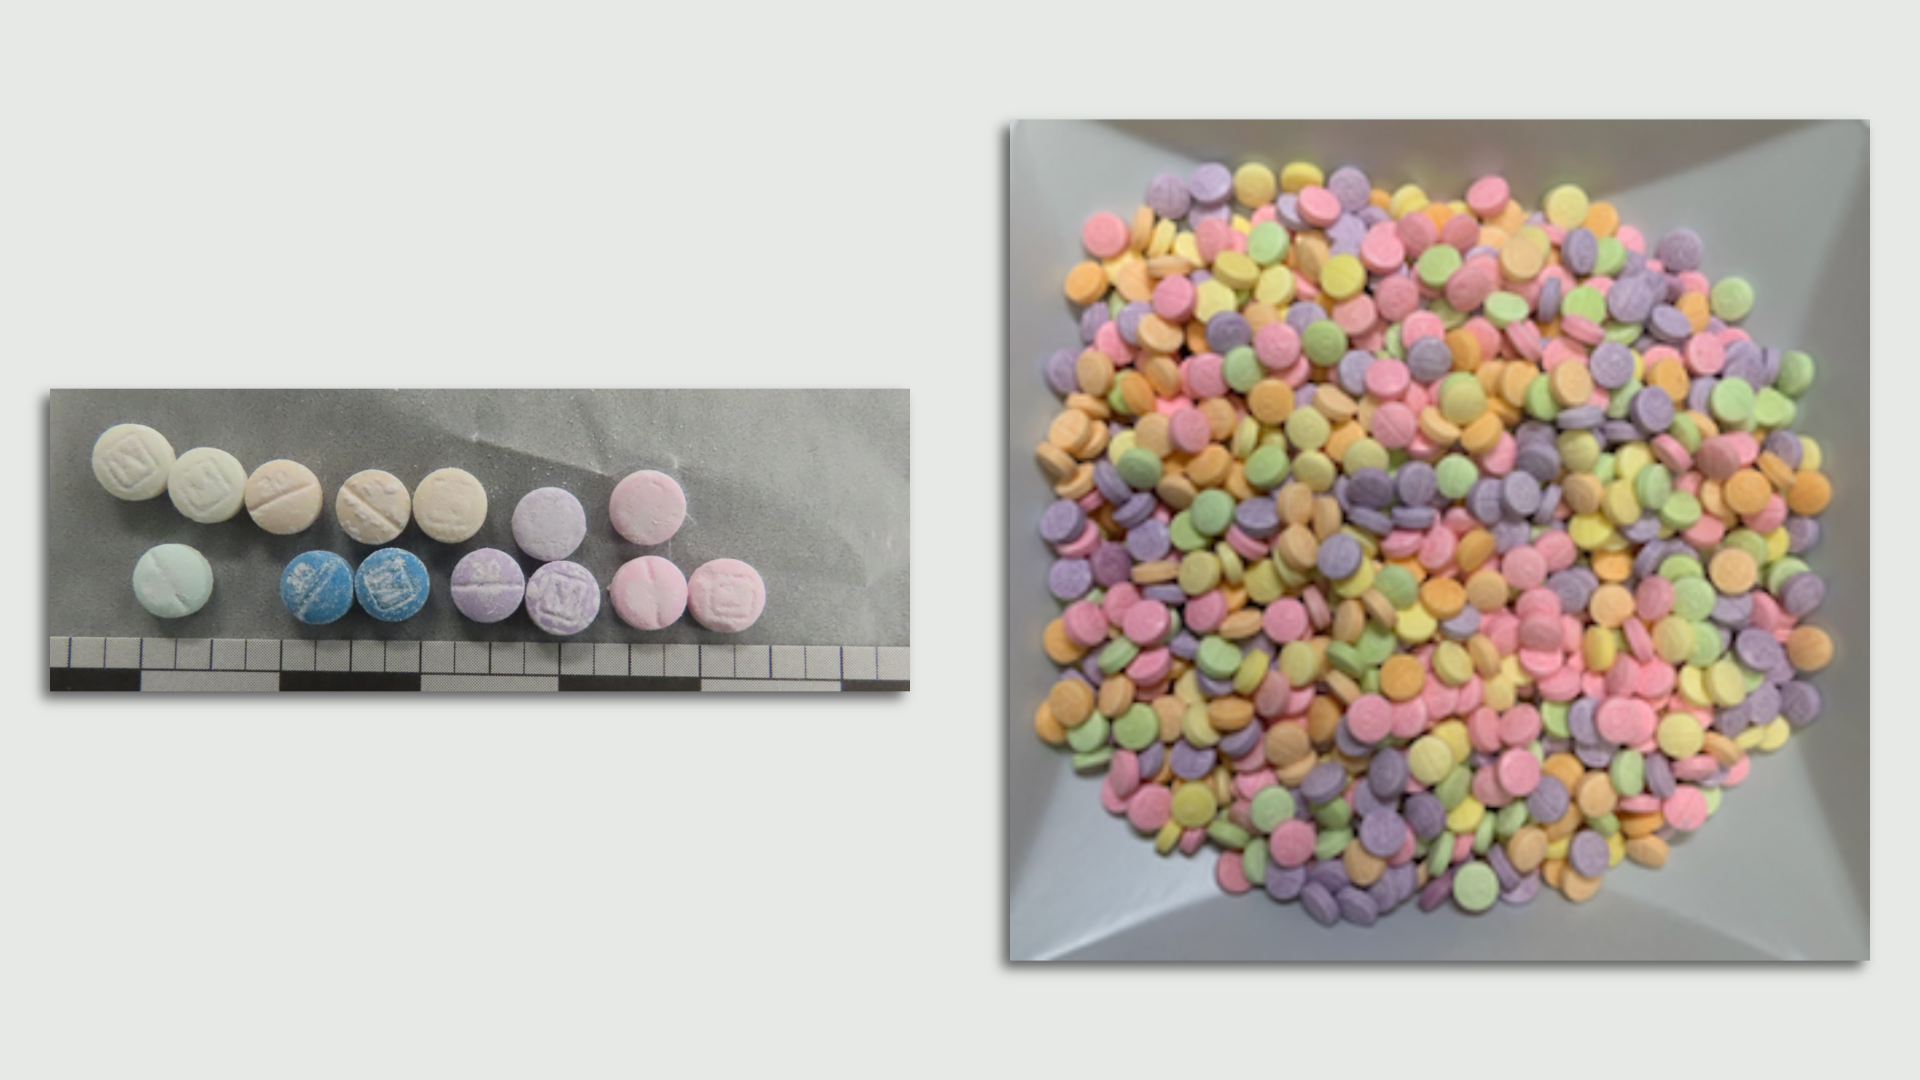 Side by side images of candy-colored fentanyl pills